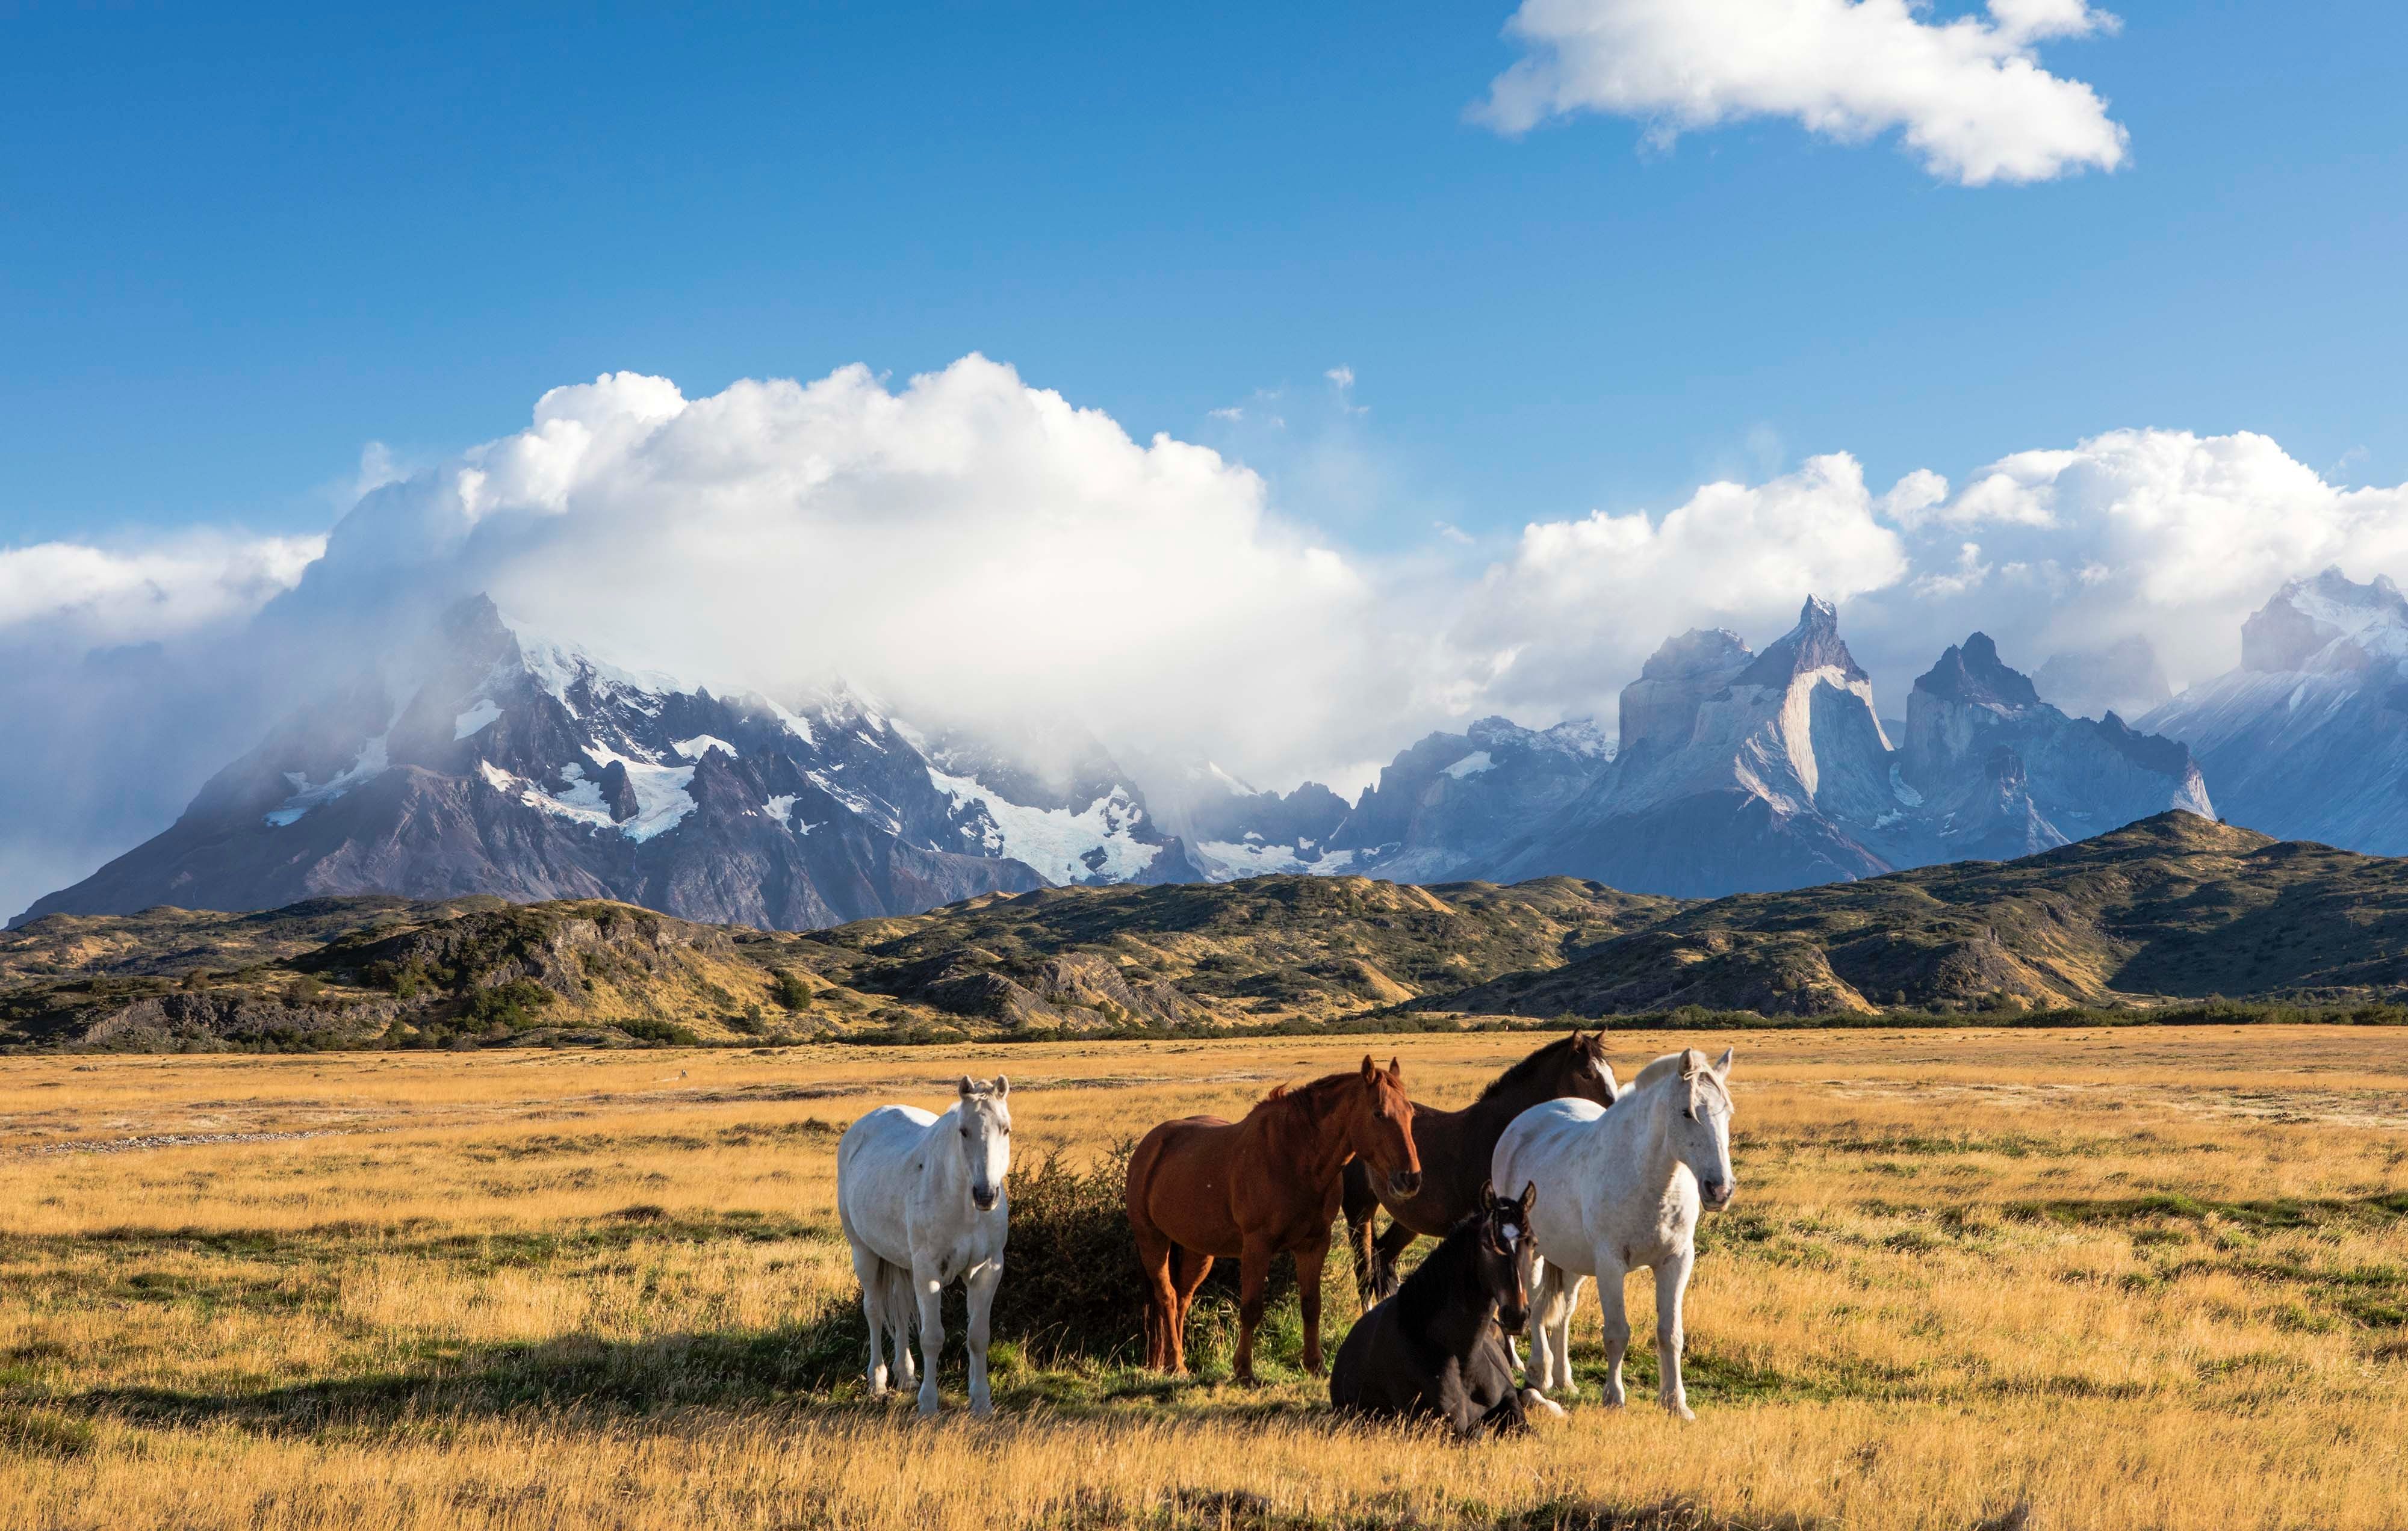 Horses on the plains of Patagonia with the Torres Del Paine mountains in the background